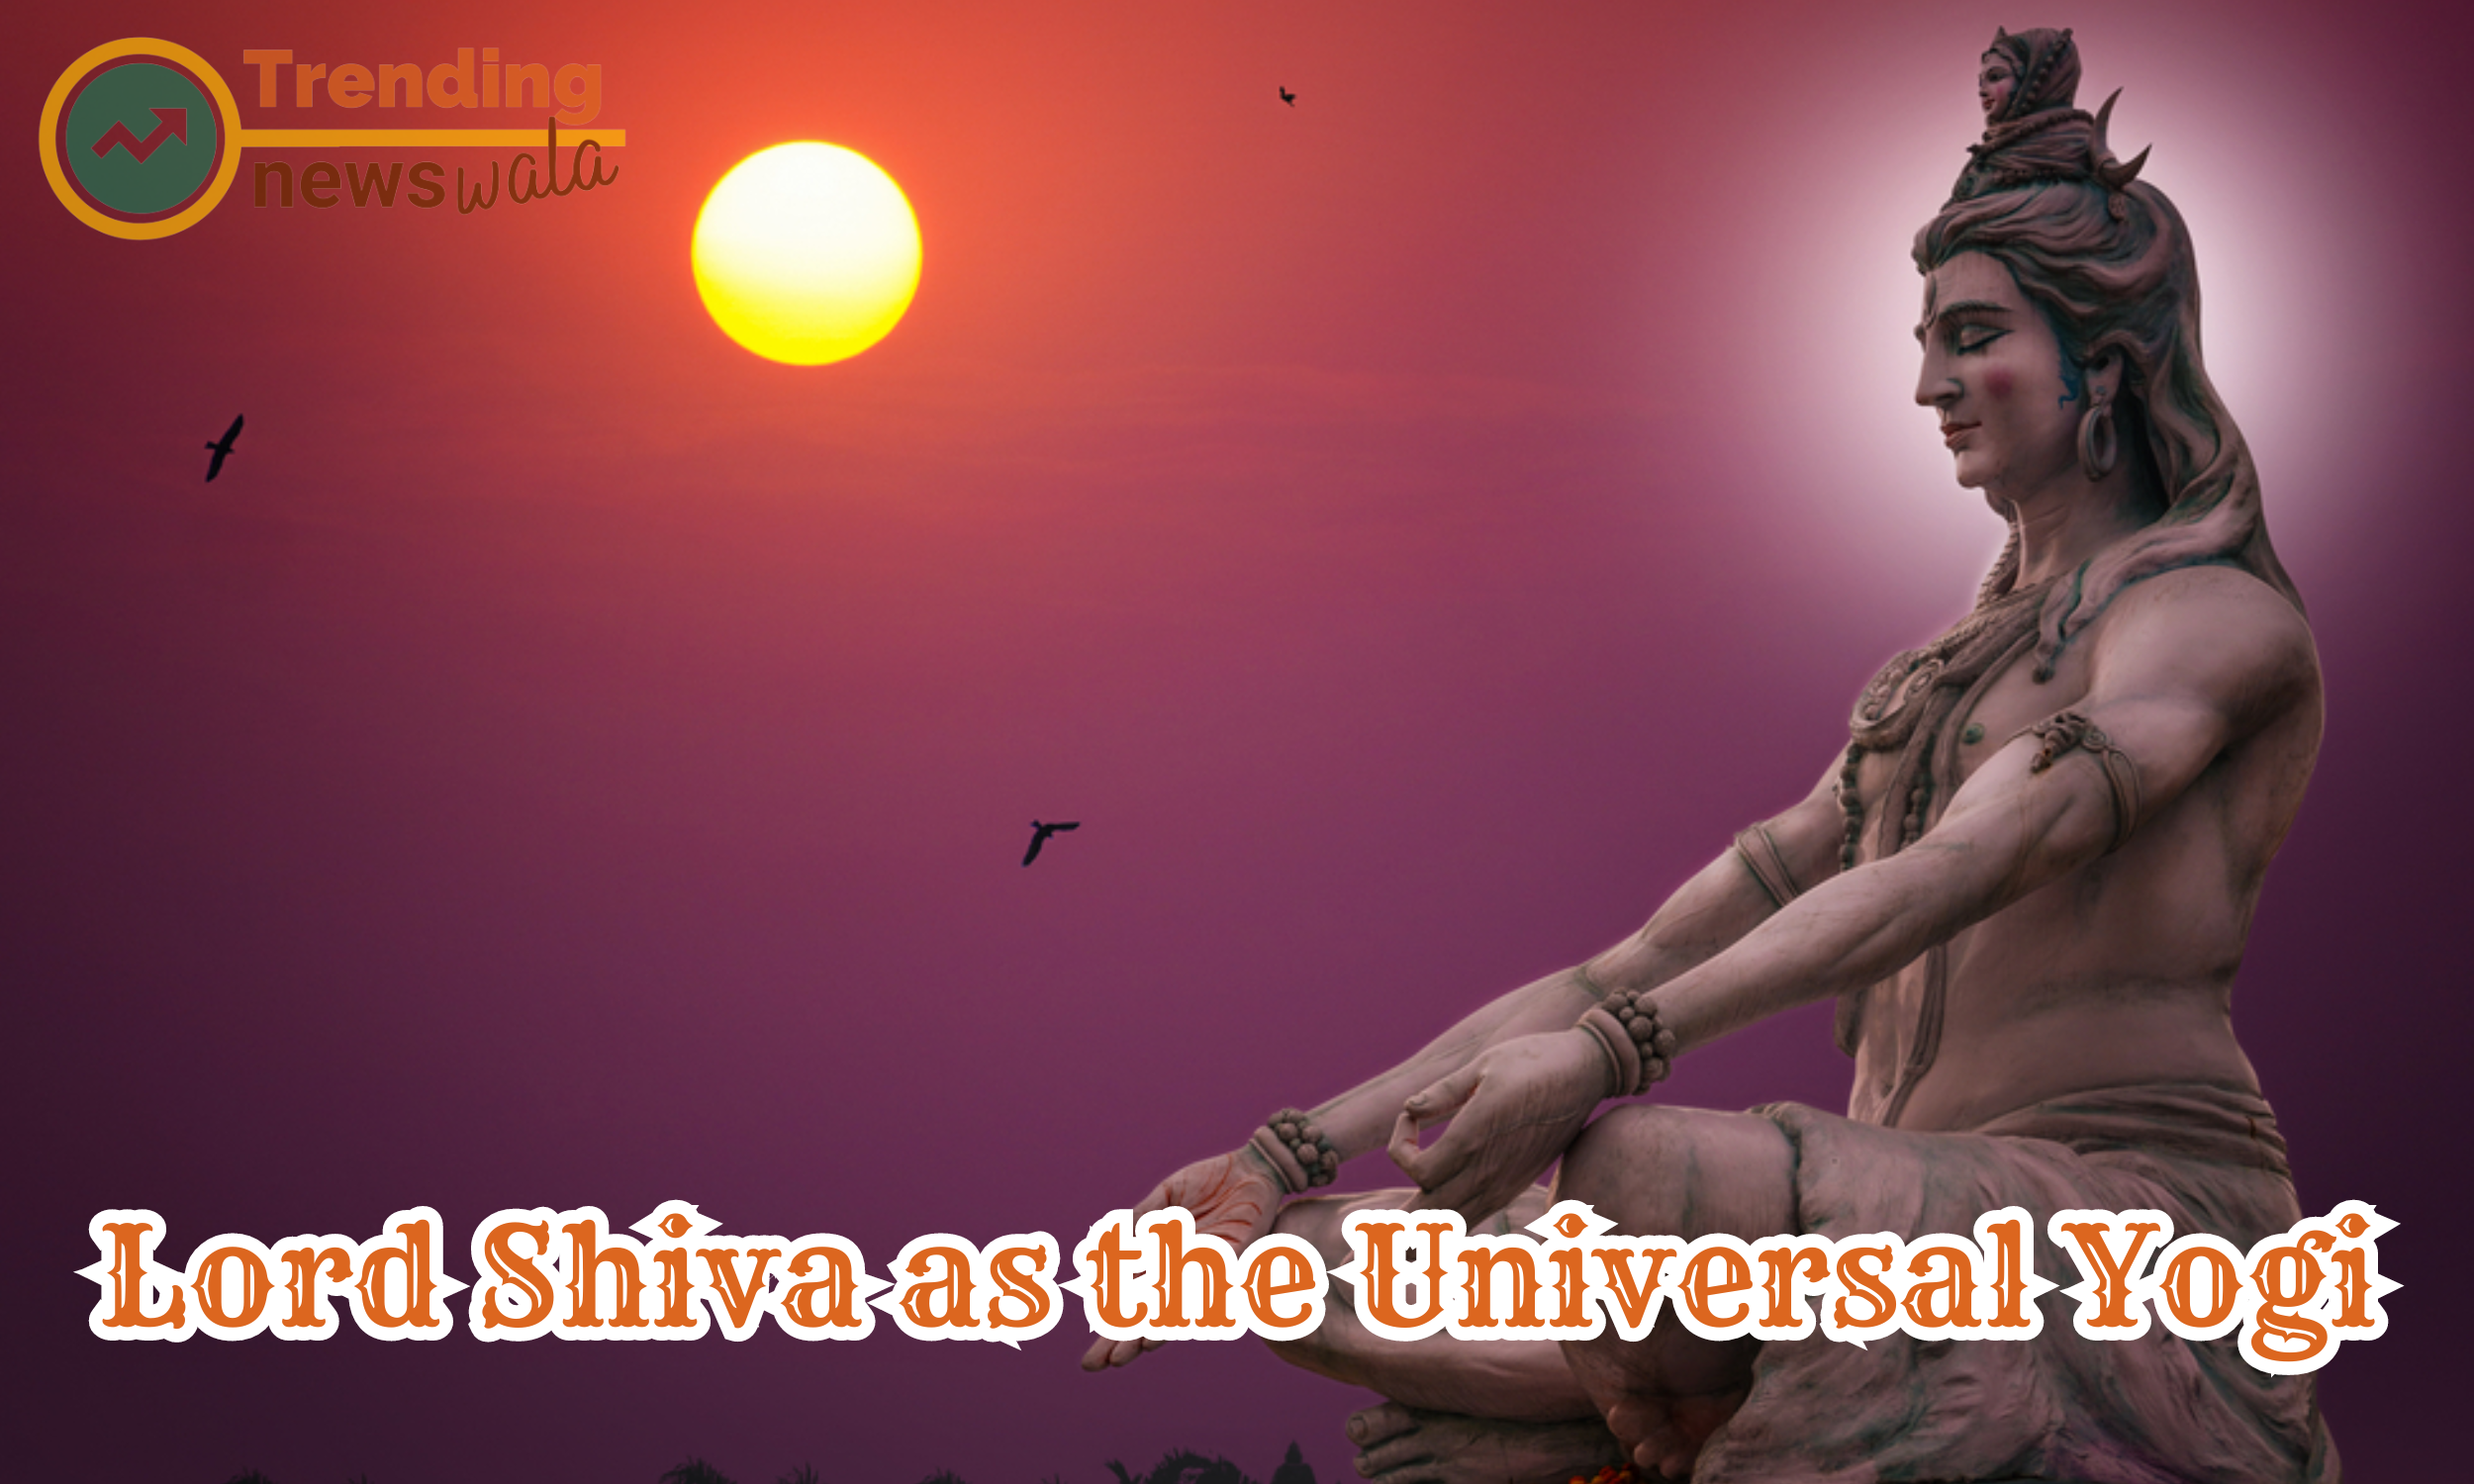 Lord Shiva is widely revered as the Universal Yogi